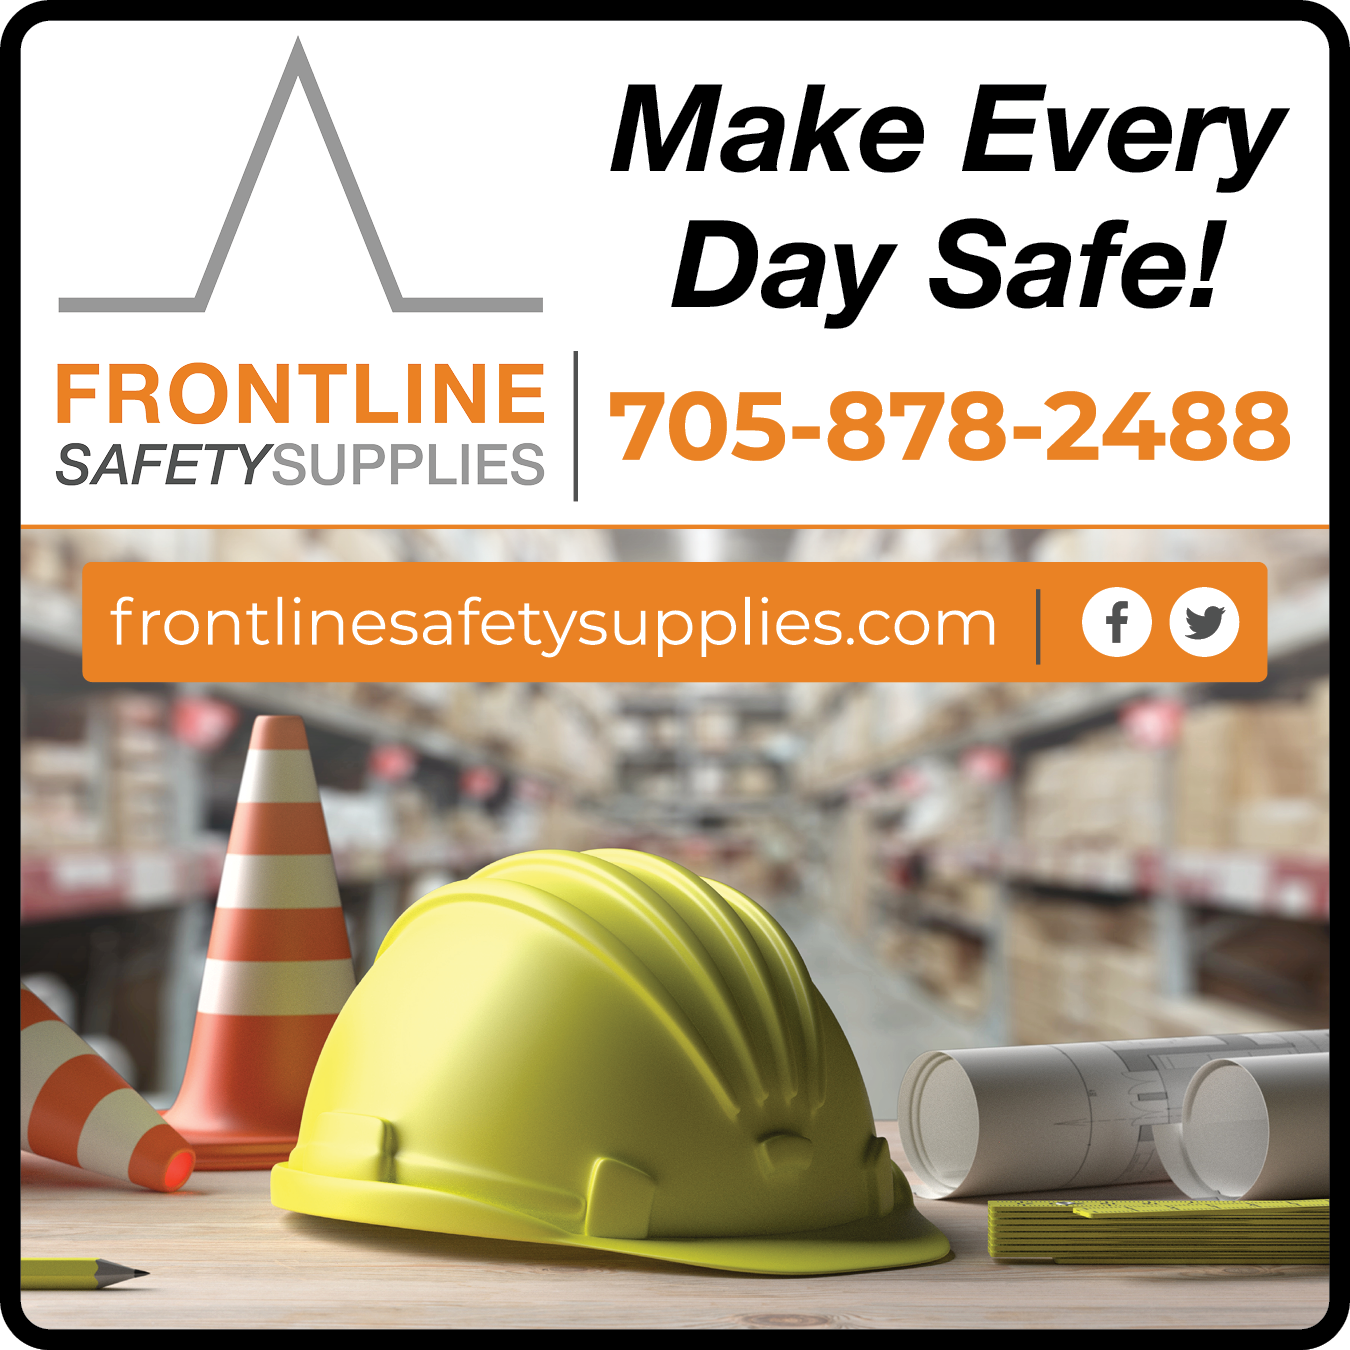 Frontline Safety Supplies